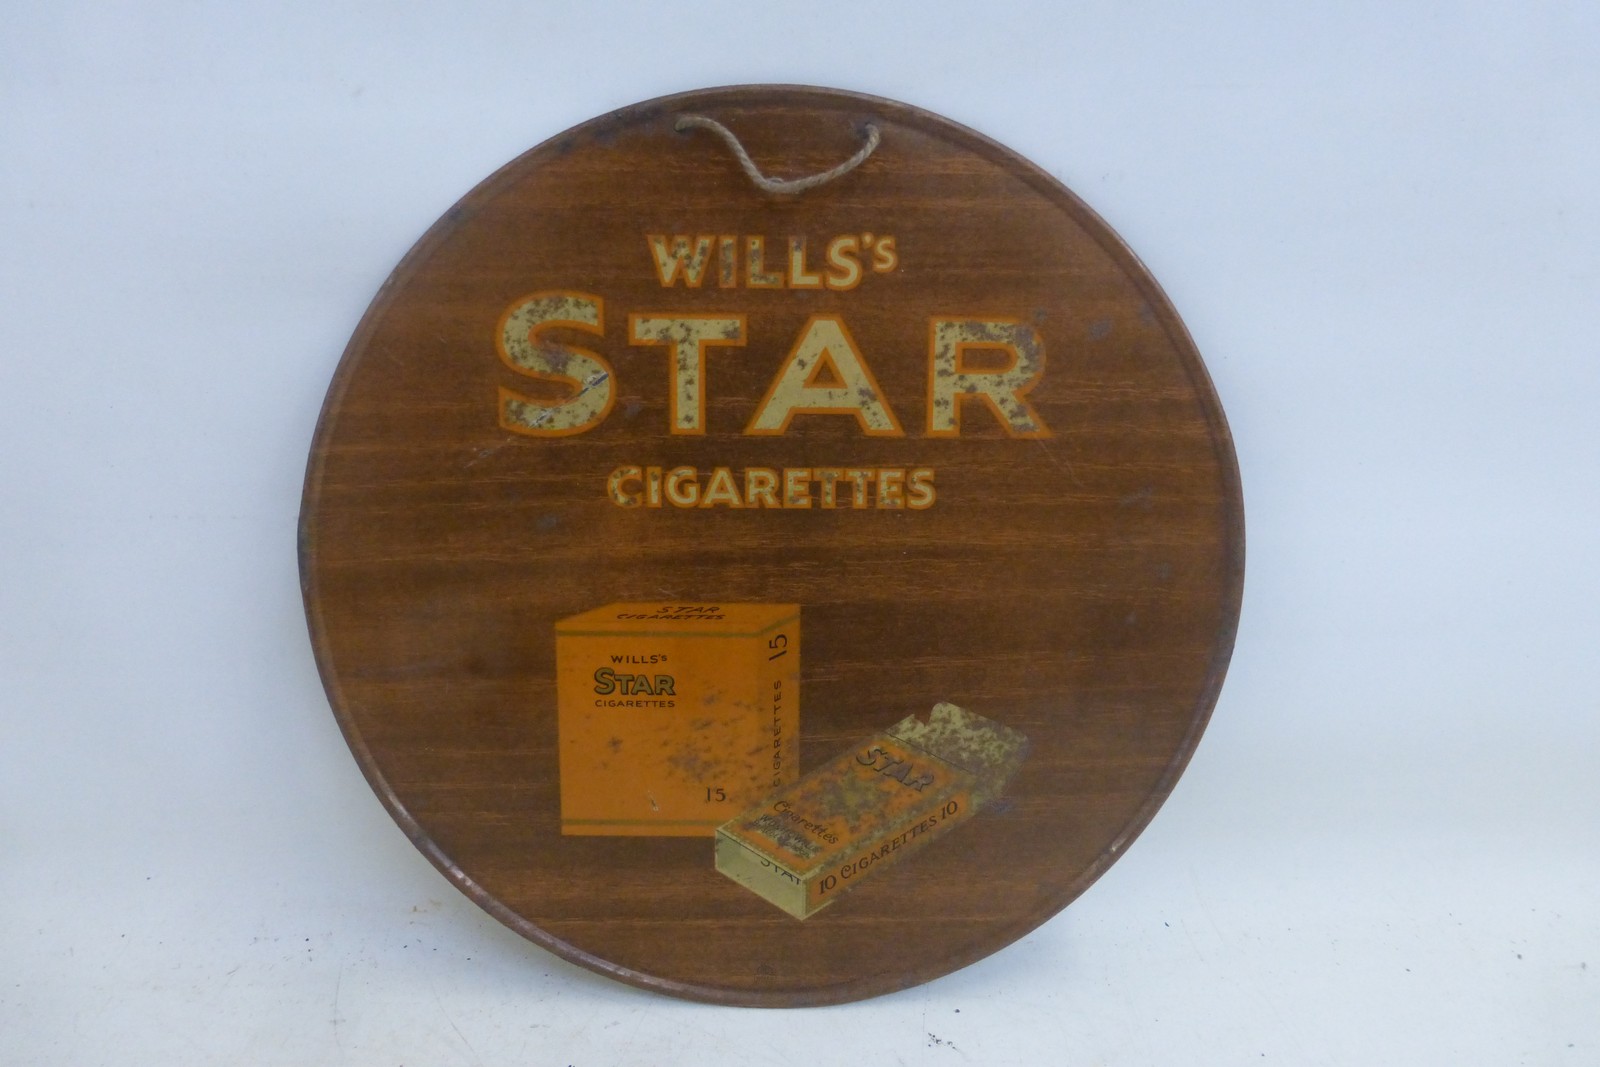 A Wills's Star Cigarettes pictorial packet tin advertising sign of circular form, 11 3/4" diameter.